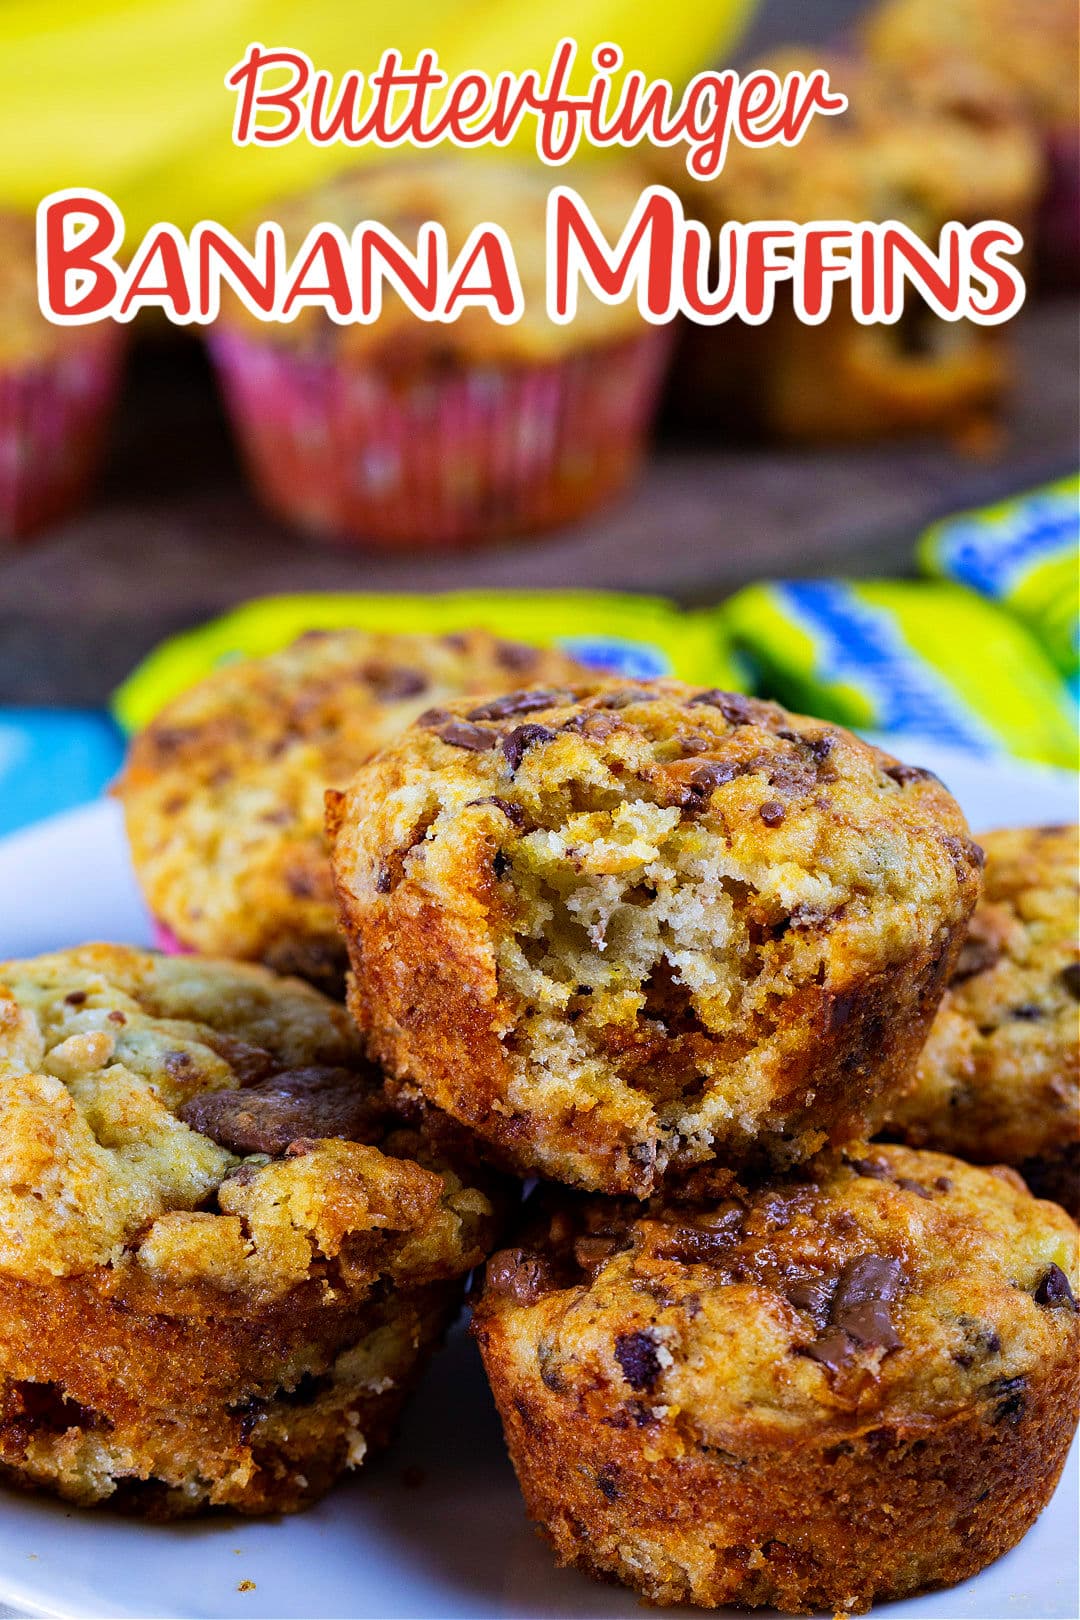 Butterfinger Banana Muffins on a plate.